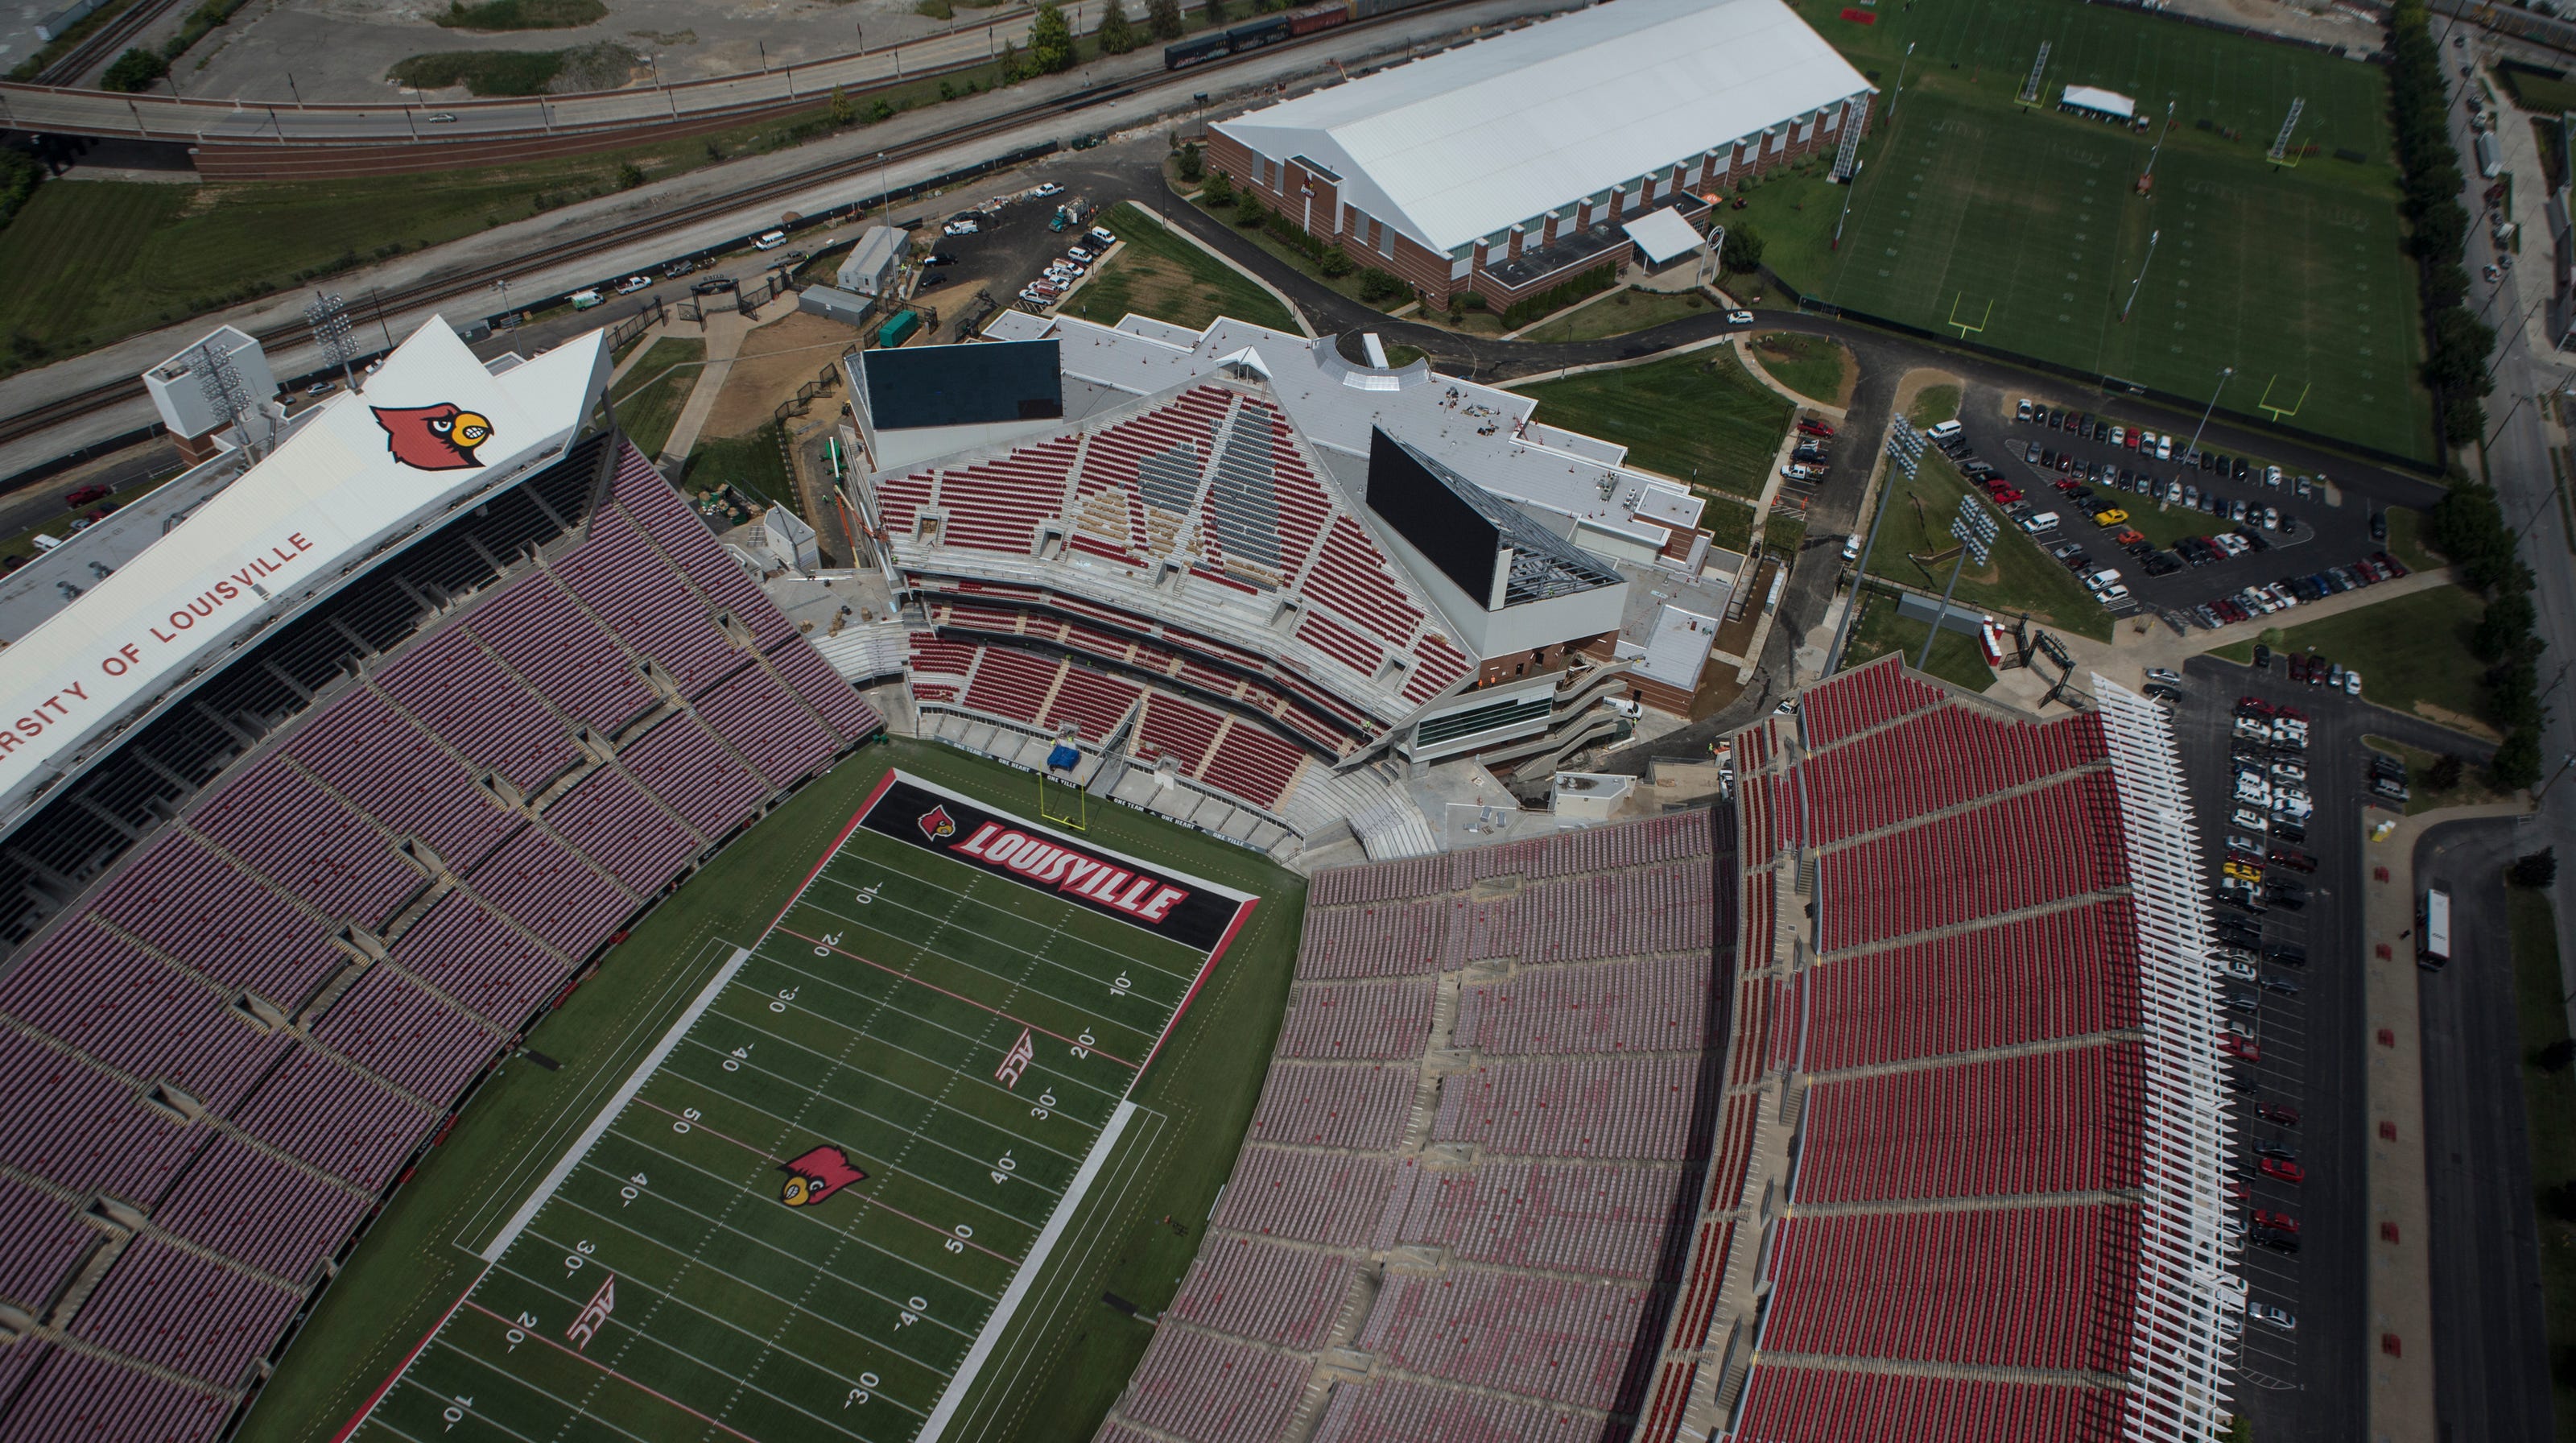 Louisville's Cardinal Stadium expansion almost complete